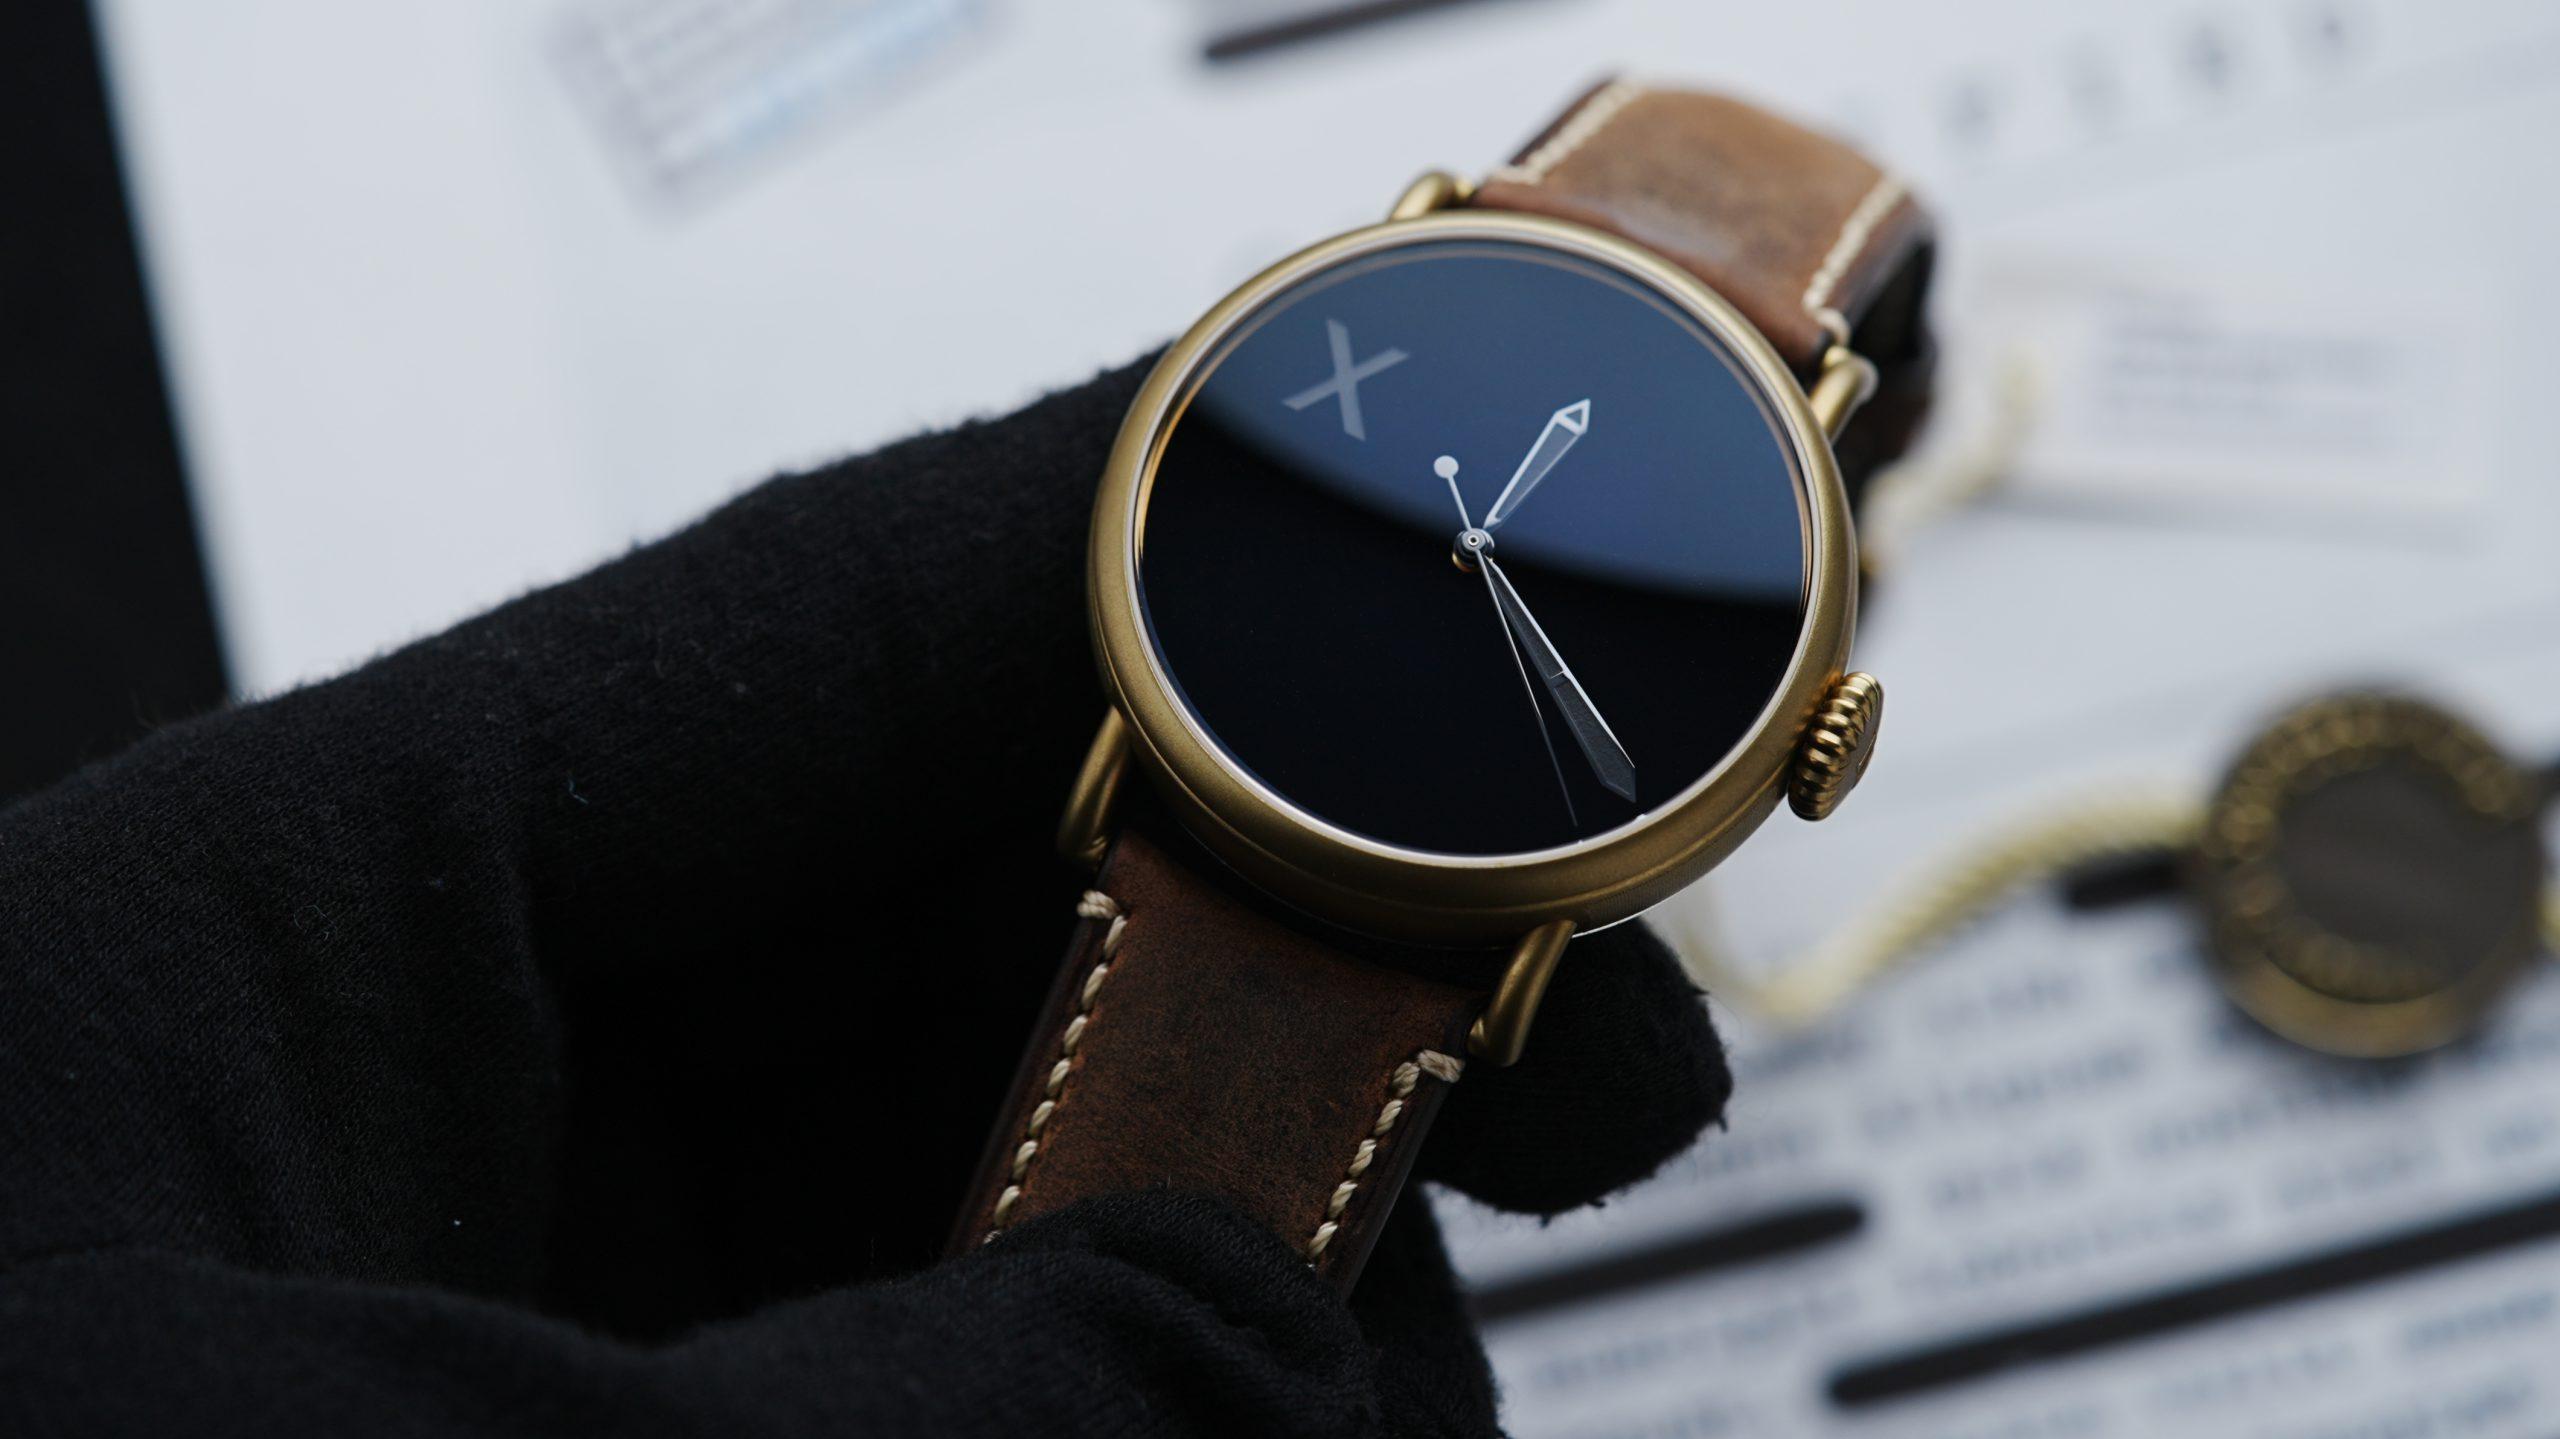 H.Moser & Cie. Confidential Project X Concept Vanta Black being held in hand.